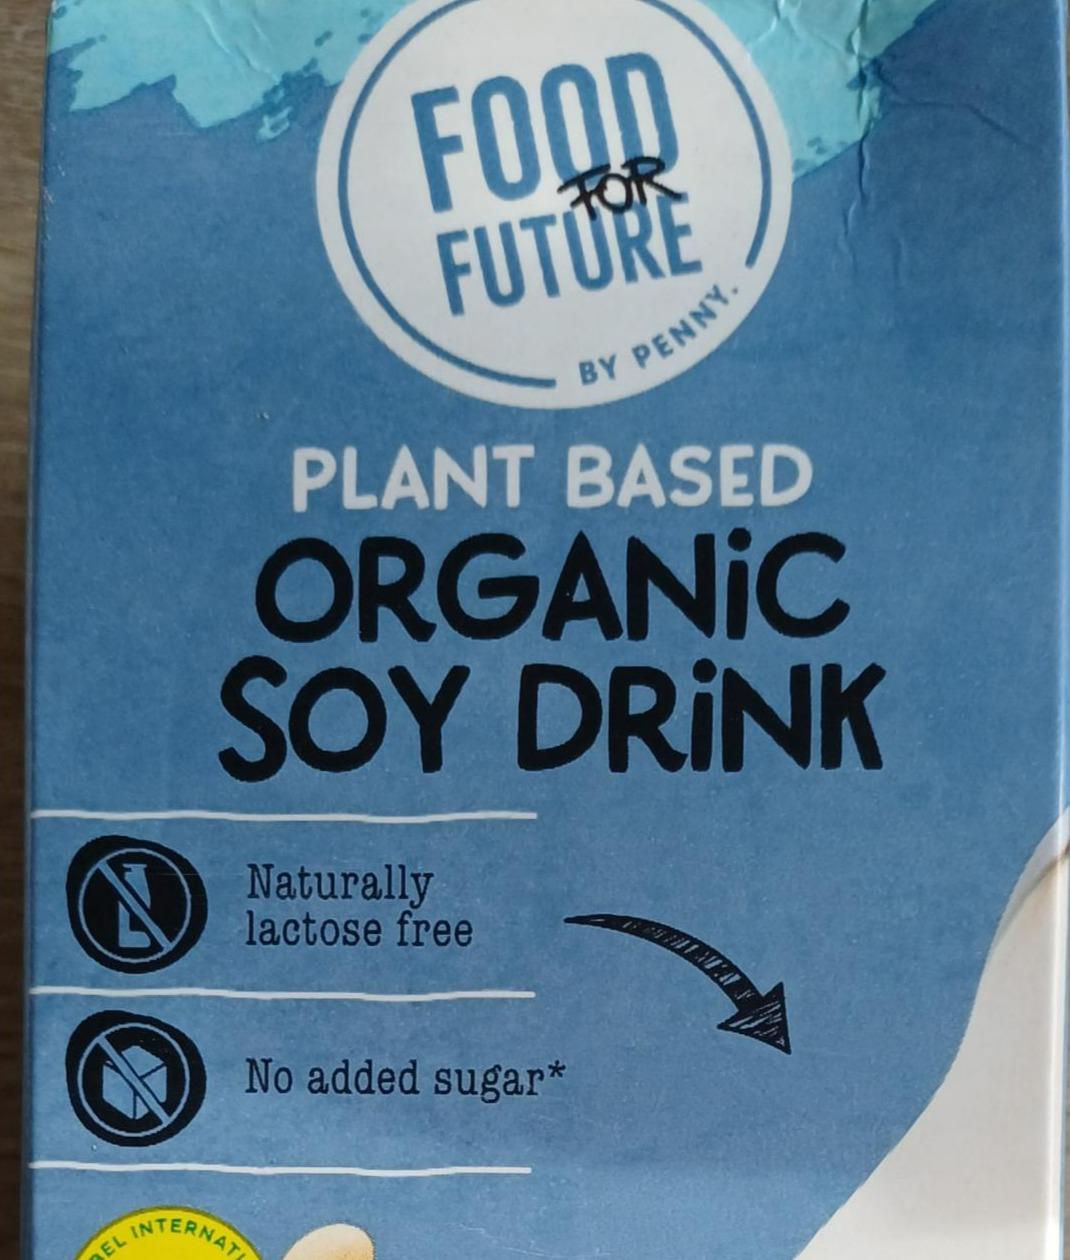 Fotografie - Plant based Organic Soy Drink Food for Future